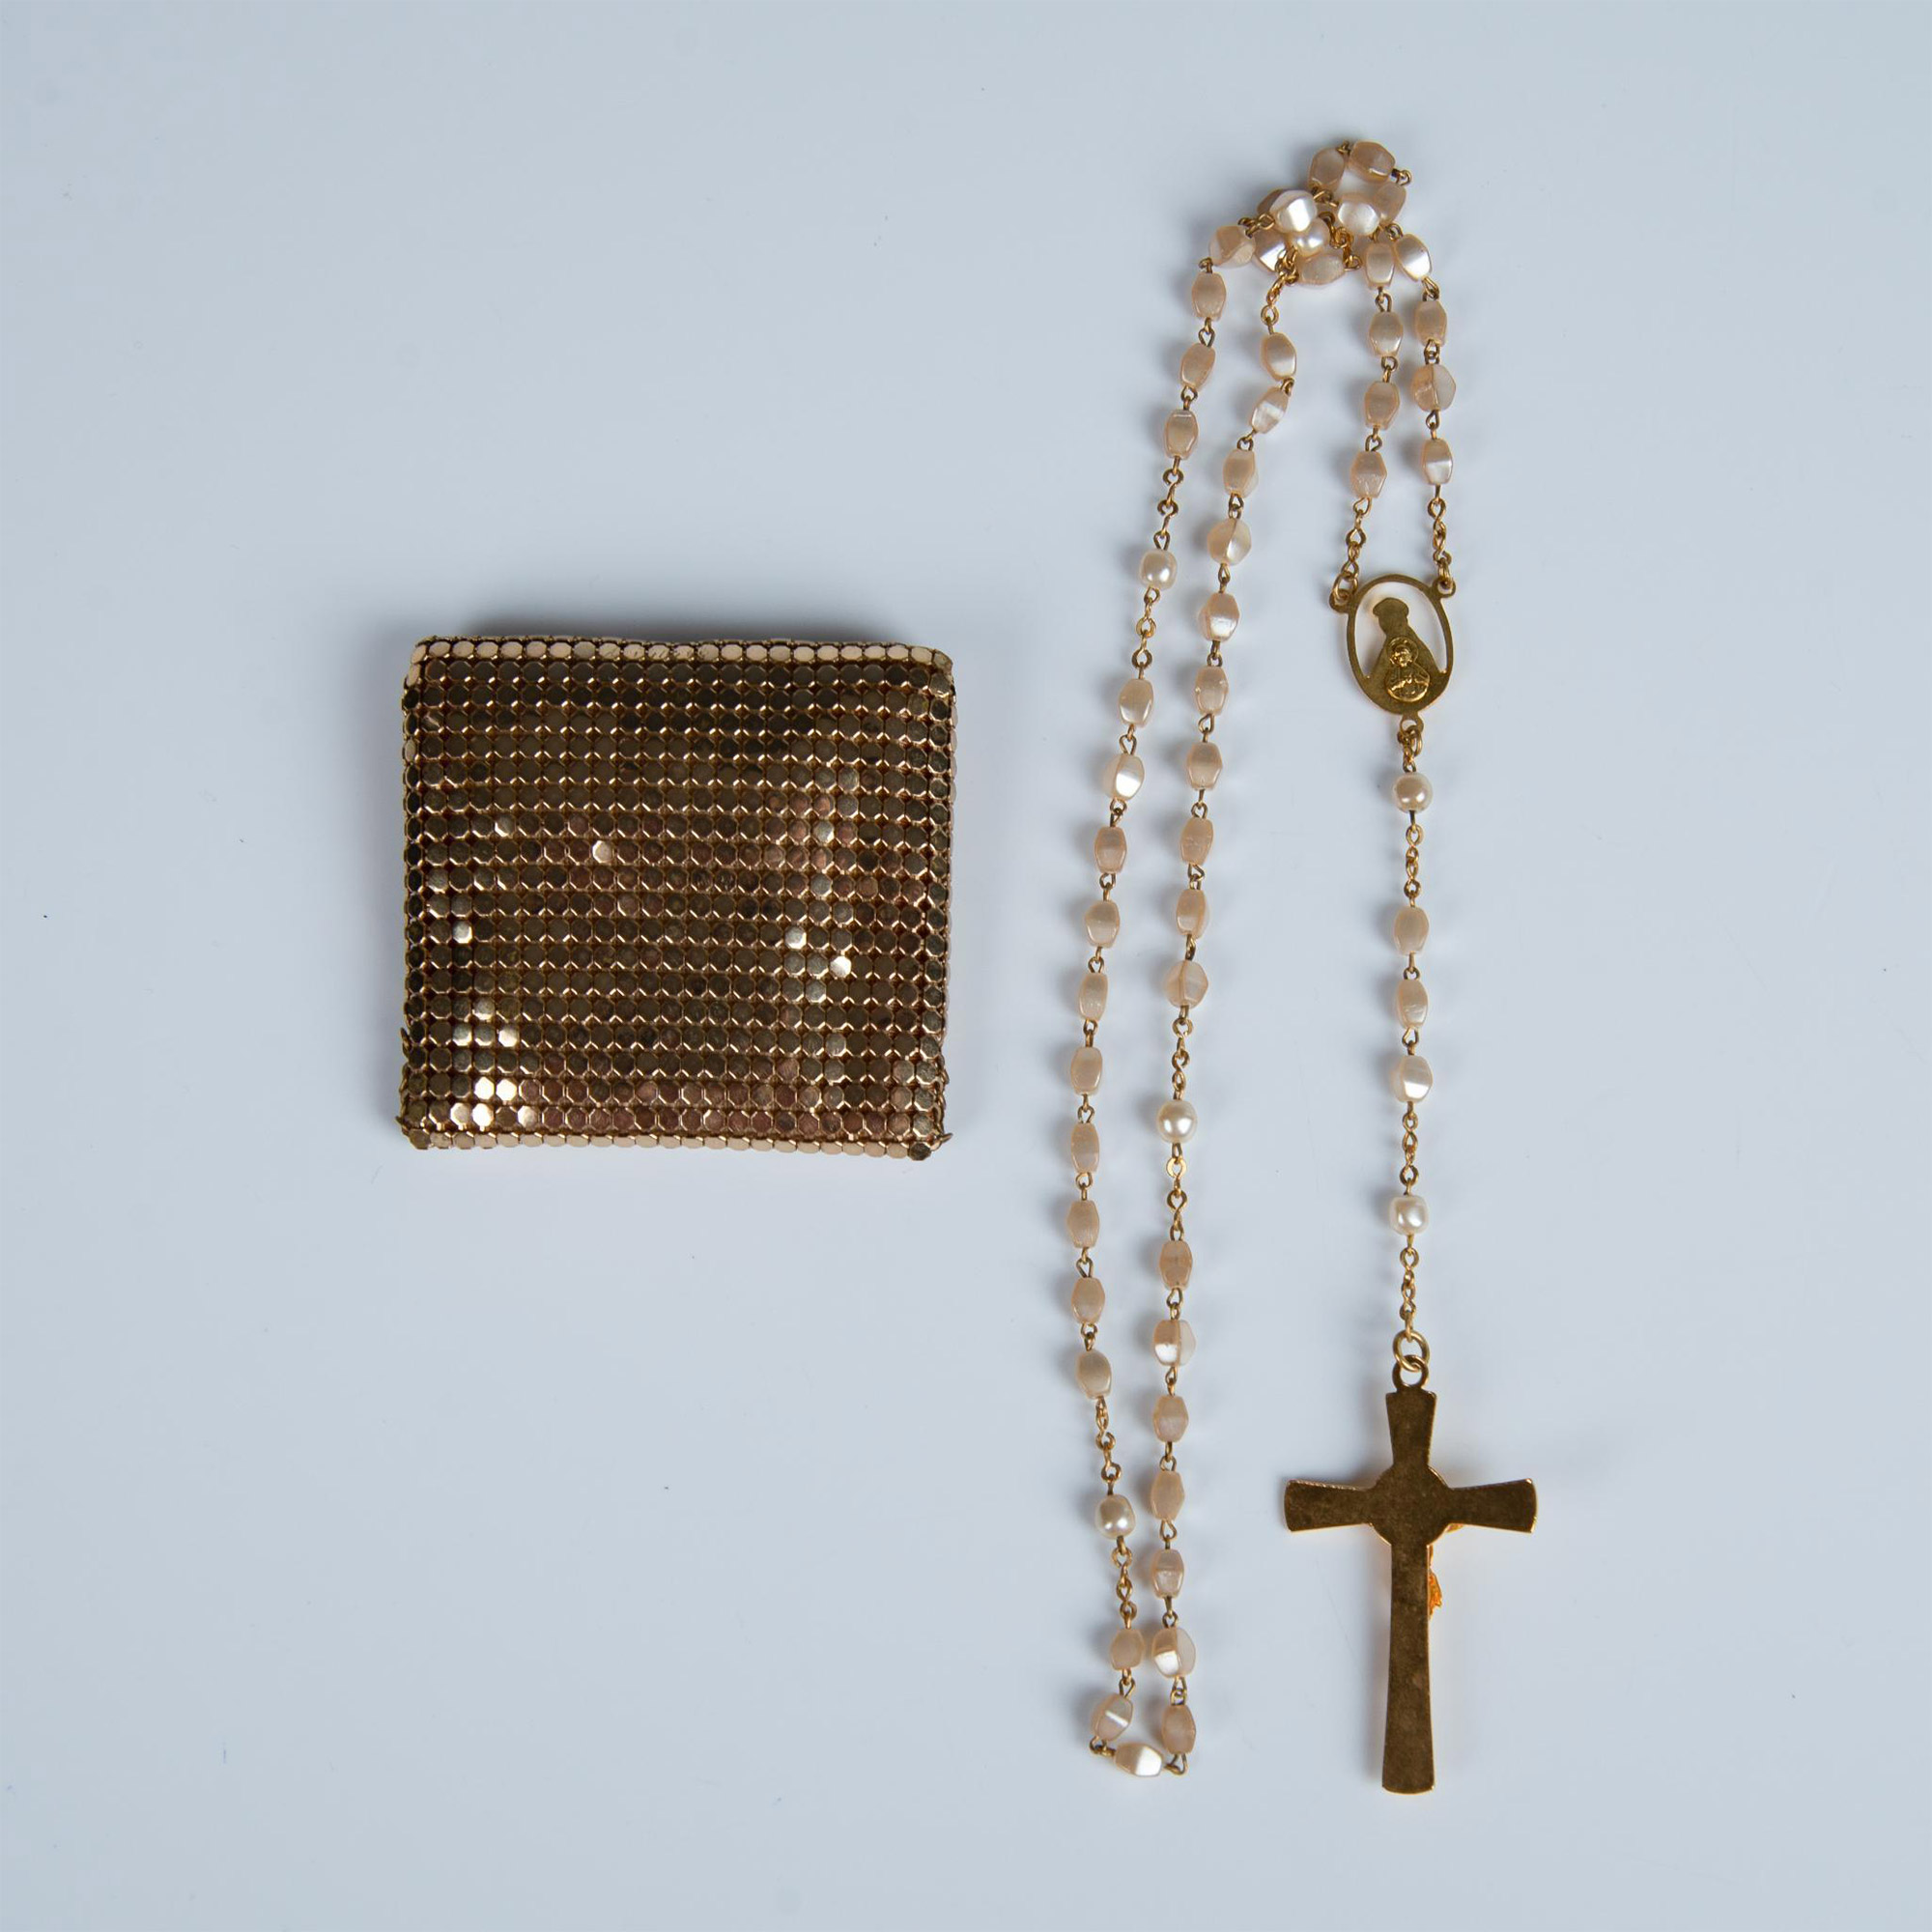 2pc Whiting & Davis Co. Gold Mesh Pouch and Christian Rosary - Image 2 of 4